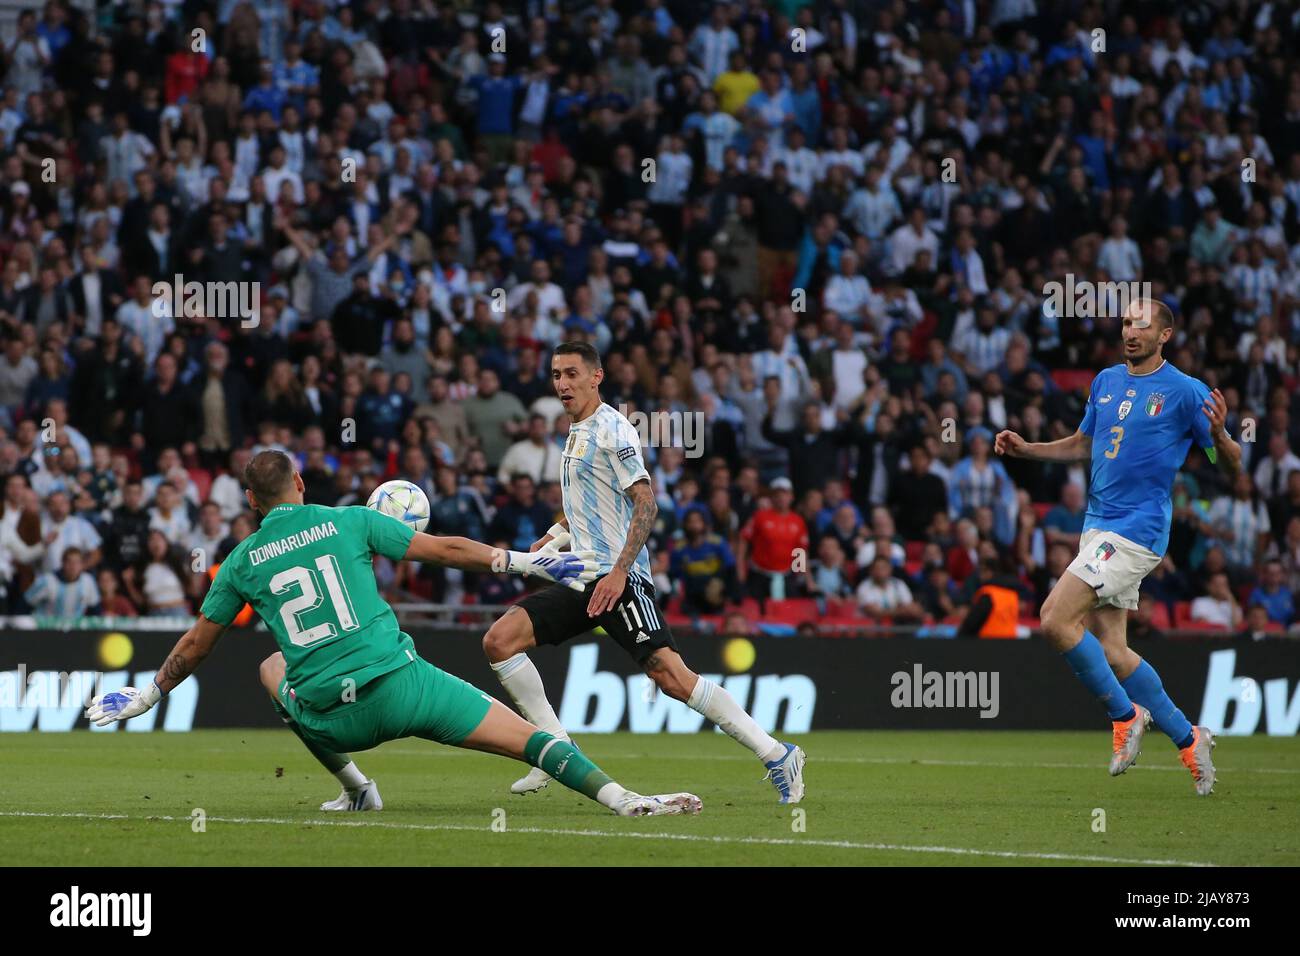 London, England, 1st June 2022. Giorgio Chiellini of Italy looks on as Angel Di Maria of Argentina scores past Gianluigi Donnarumma of Italy to give the side a 2-0 lead during the CONMEBOL-UEFA Cup of Champions match at Wembley Stadium, London. Picture credit should read: Jonathan Moscrop / Sportimage Credit: Sportimage/Alamy Live News Credit: Sportimage/Alamy Live News Stock Photo